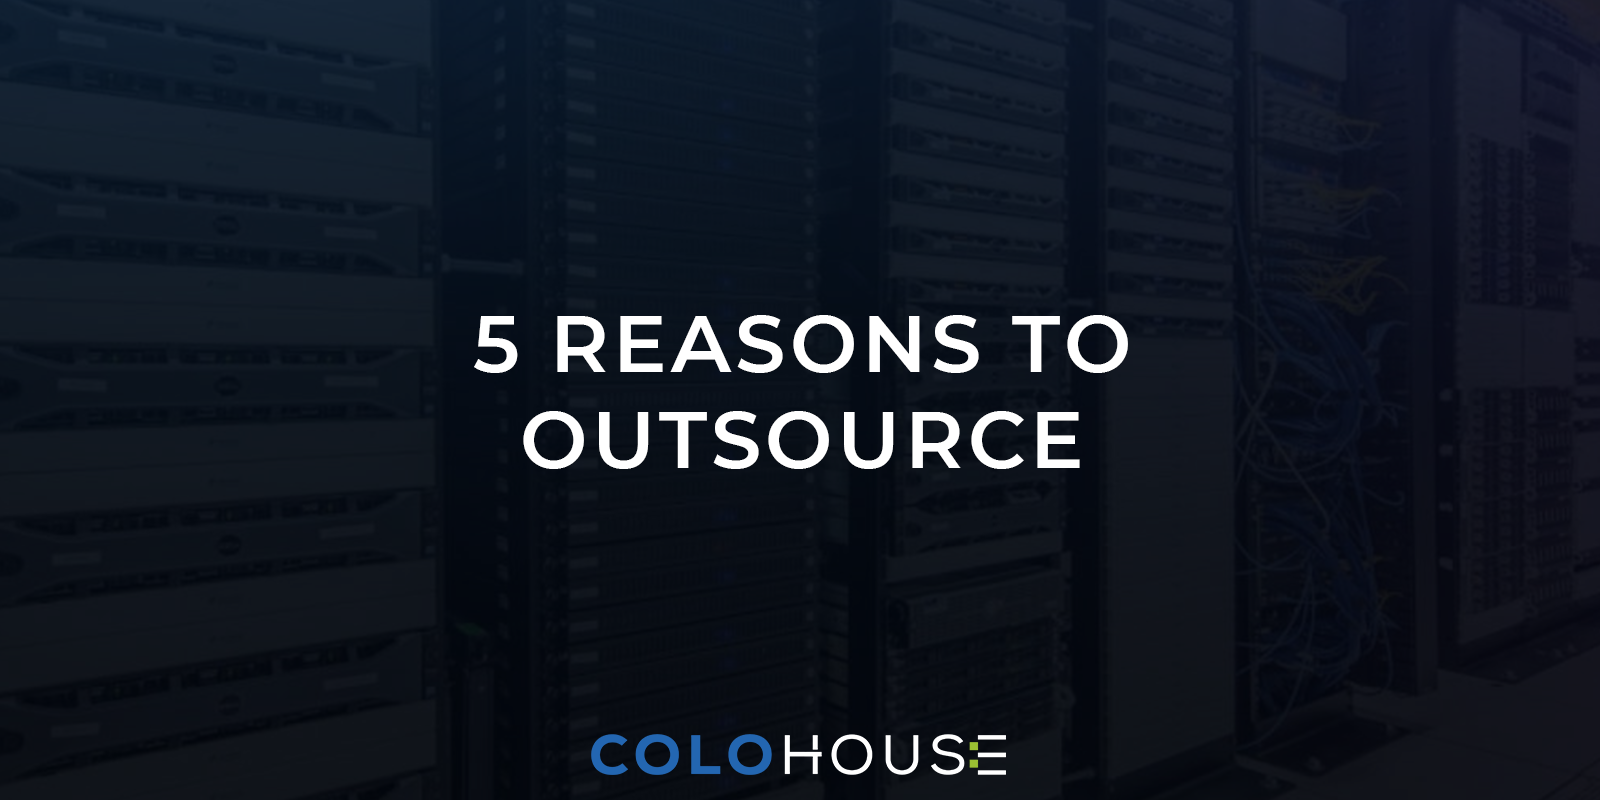 blog title: 5 reasons to outsource